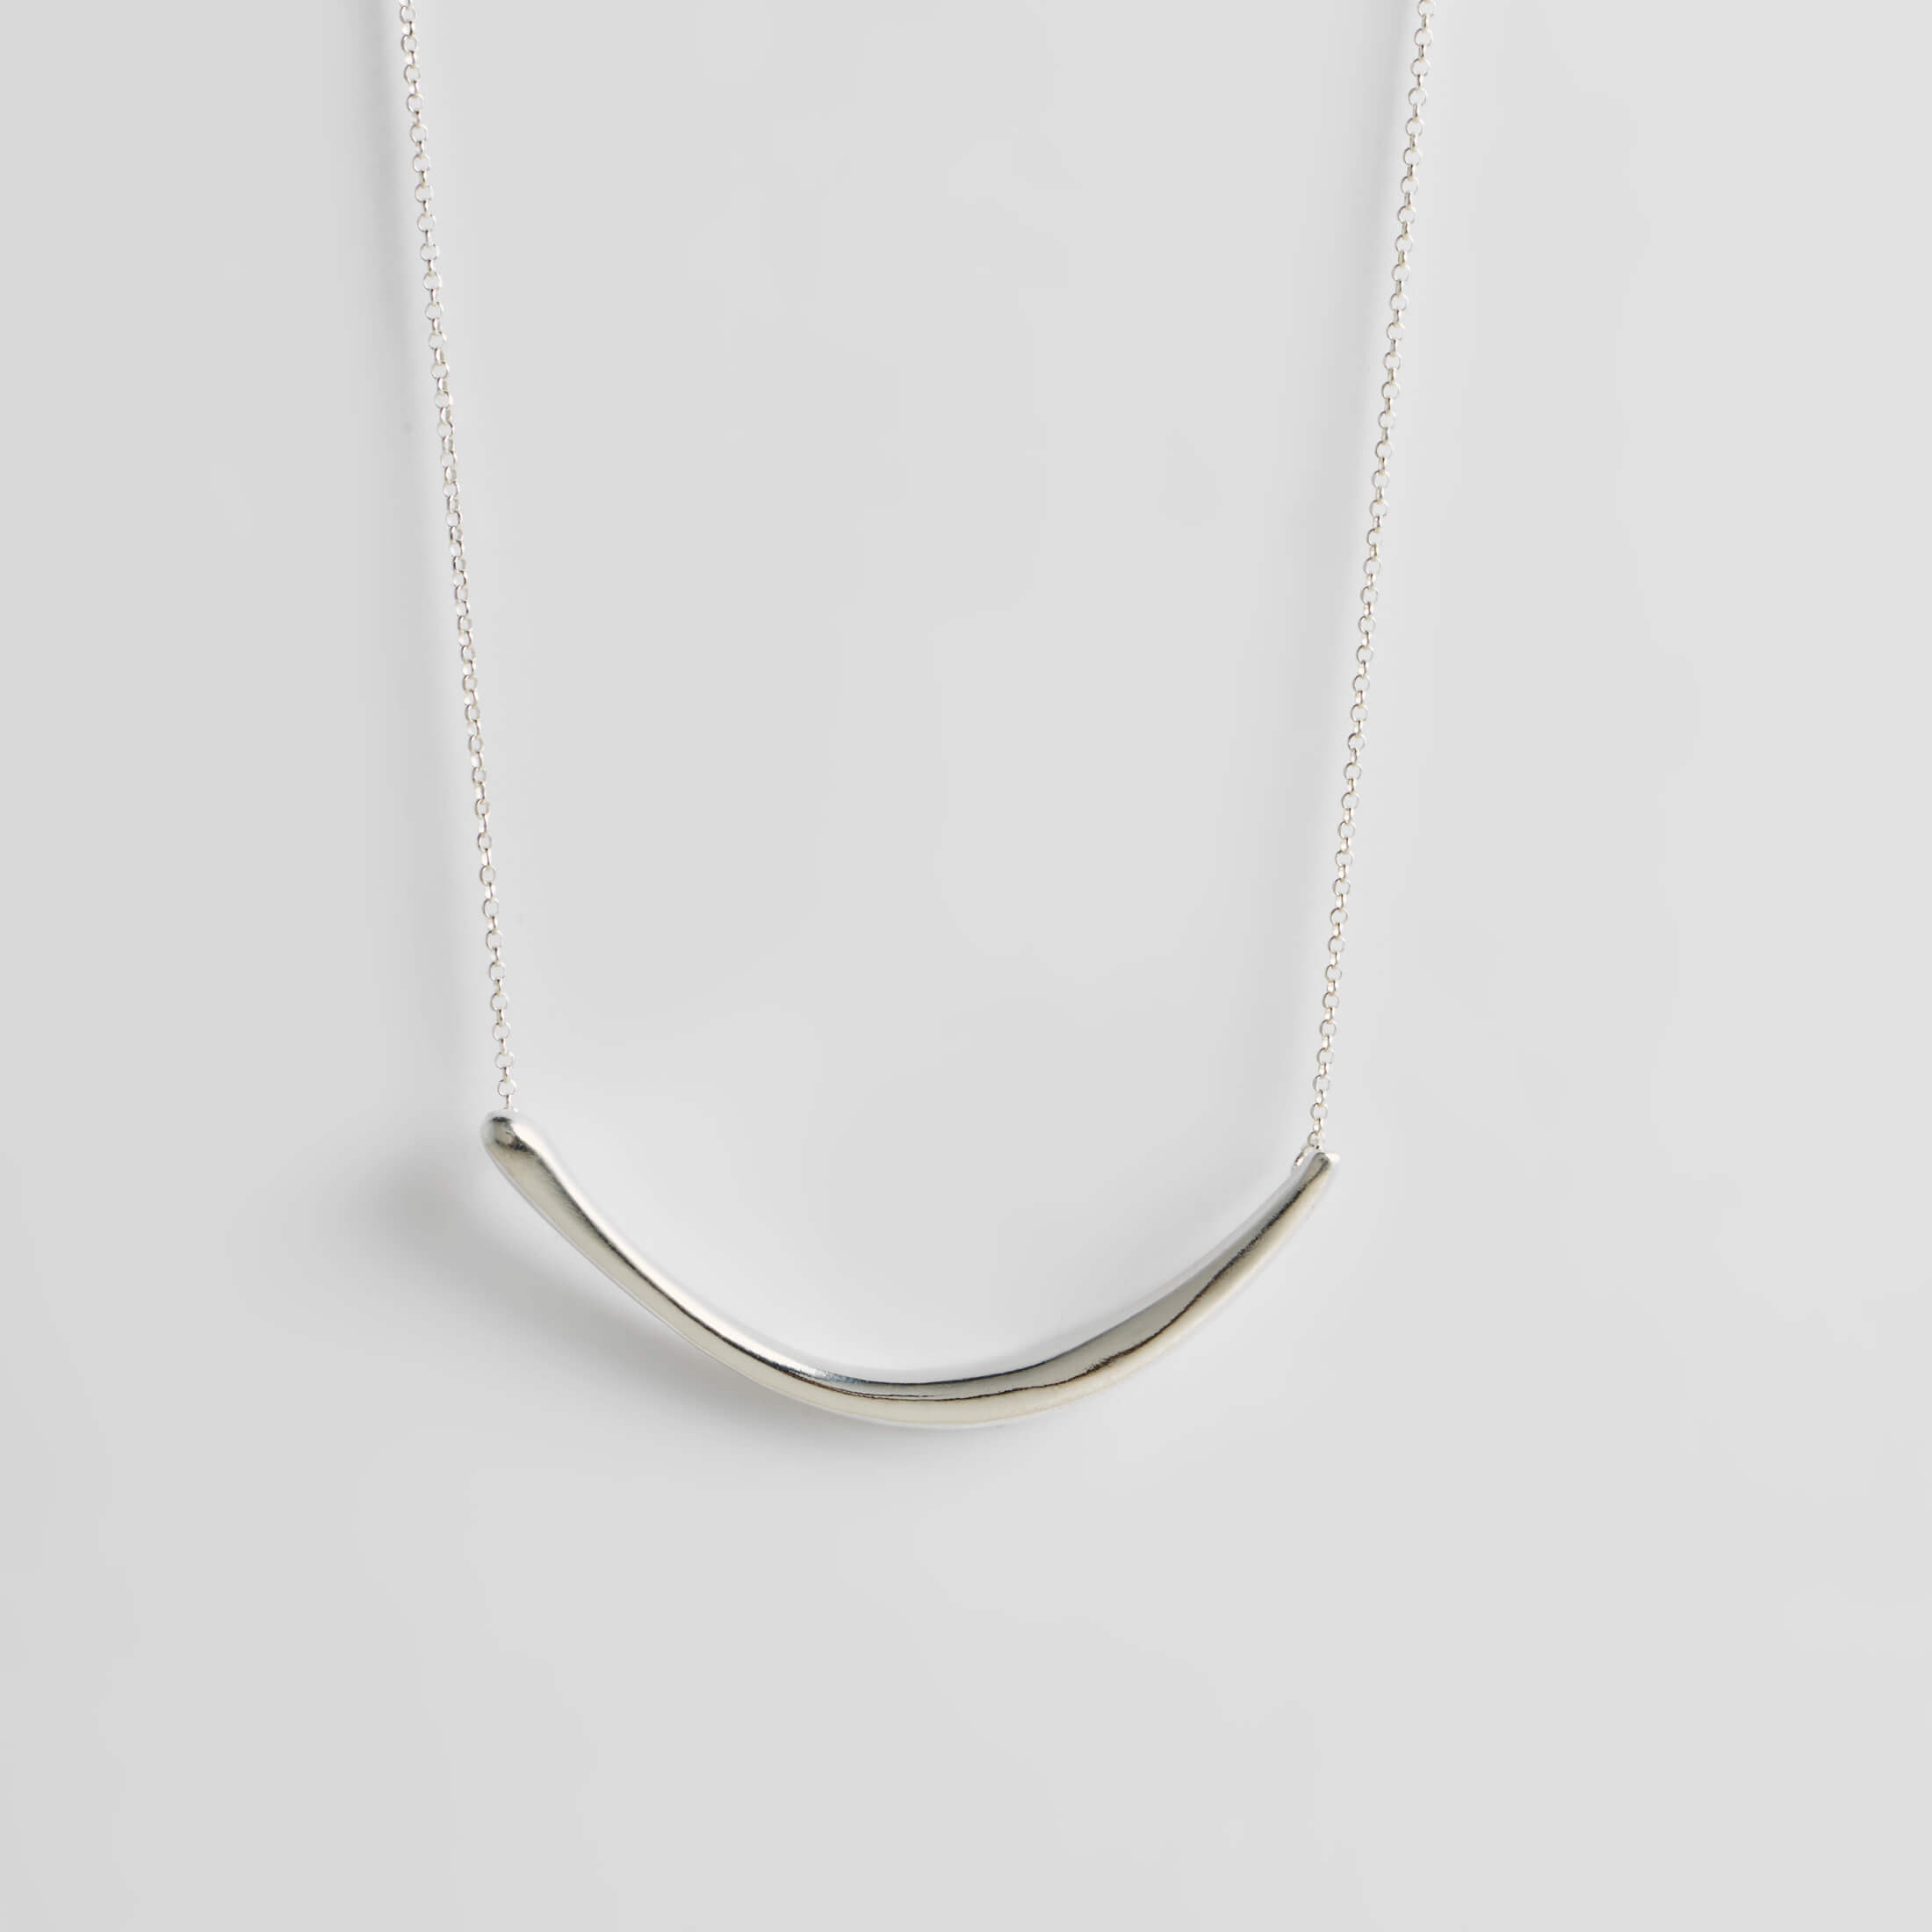 Swing My Mood Necklace by Xoutou's